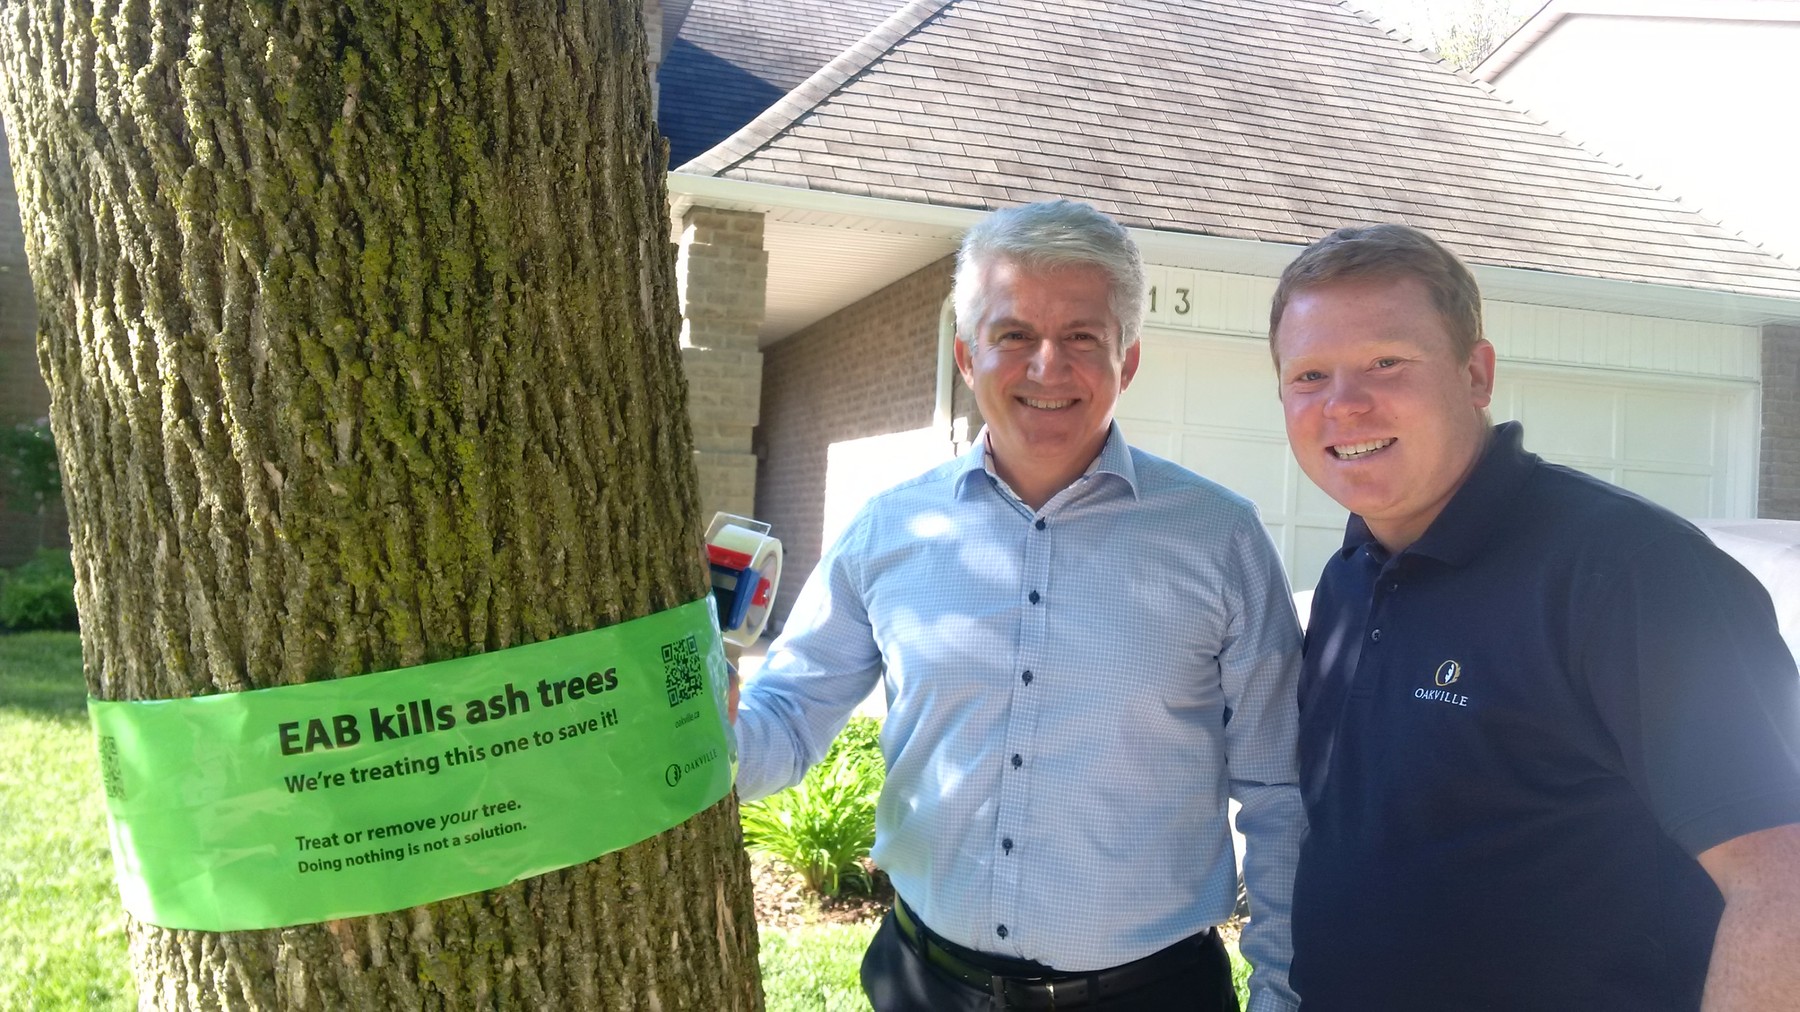 Jalil Hashemi (left), acting manager, Town of Oakville Forestry Services, and Regional and Town Councillor Sean O’Meara launch the town’s 2016 Canopy Conservation program to treat ash trees. | Town of Oakville